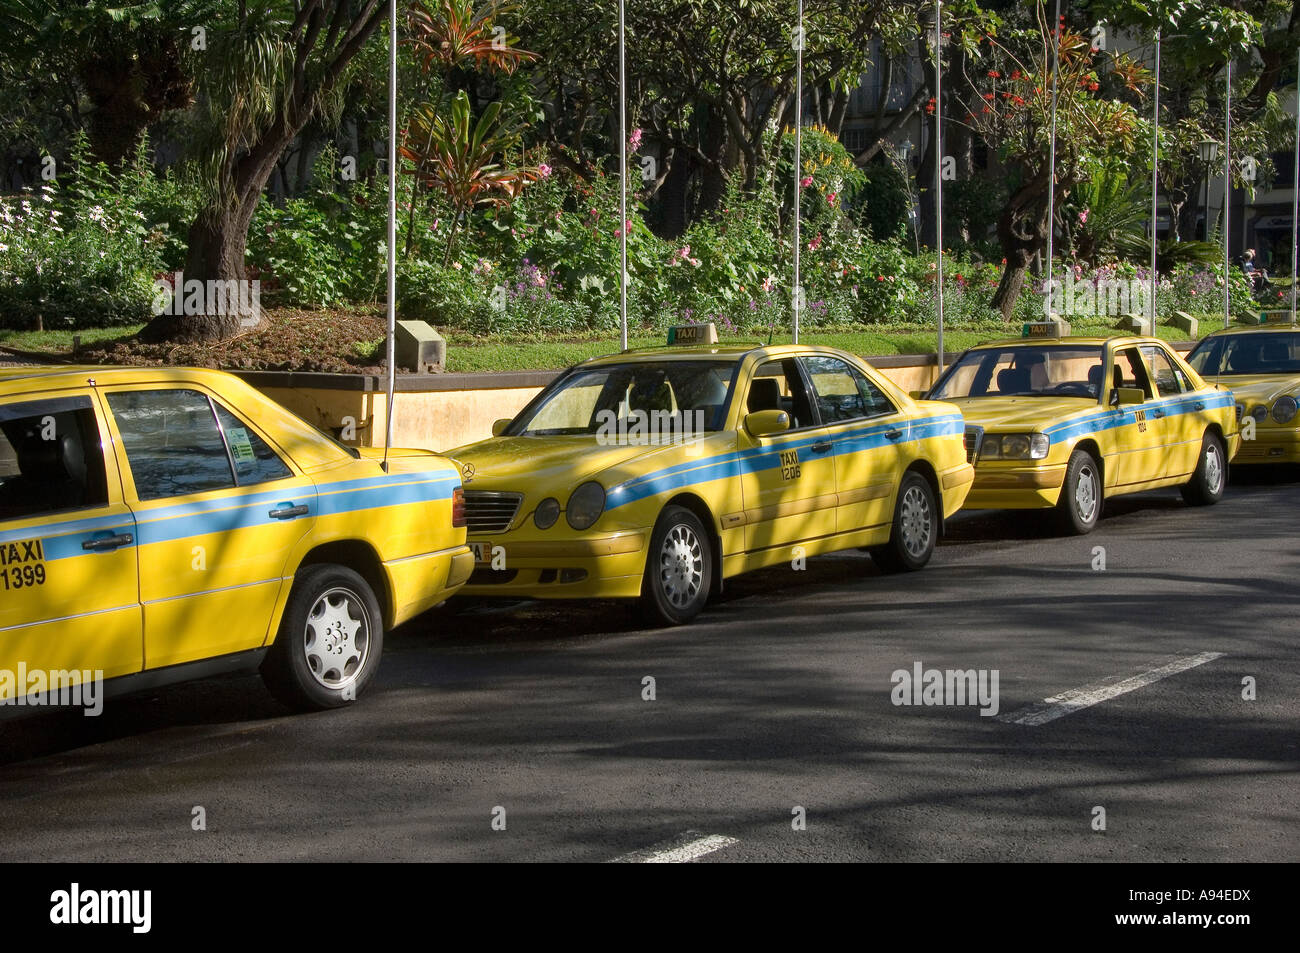 Yellow taxis cab cabs parked at taxi rank in the town city centre Funchal Madeira Portugal EU Europe Stock Photo